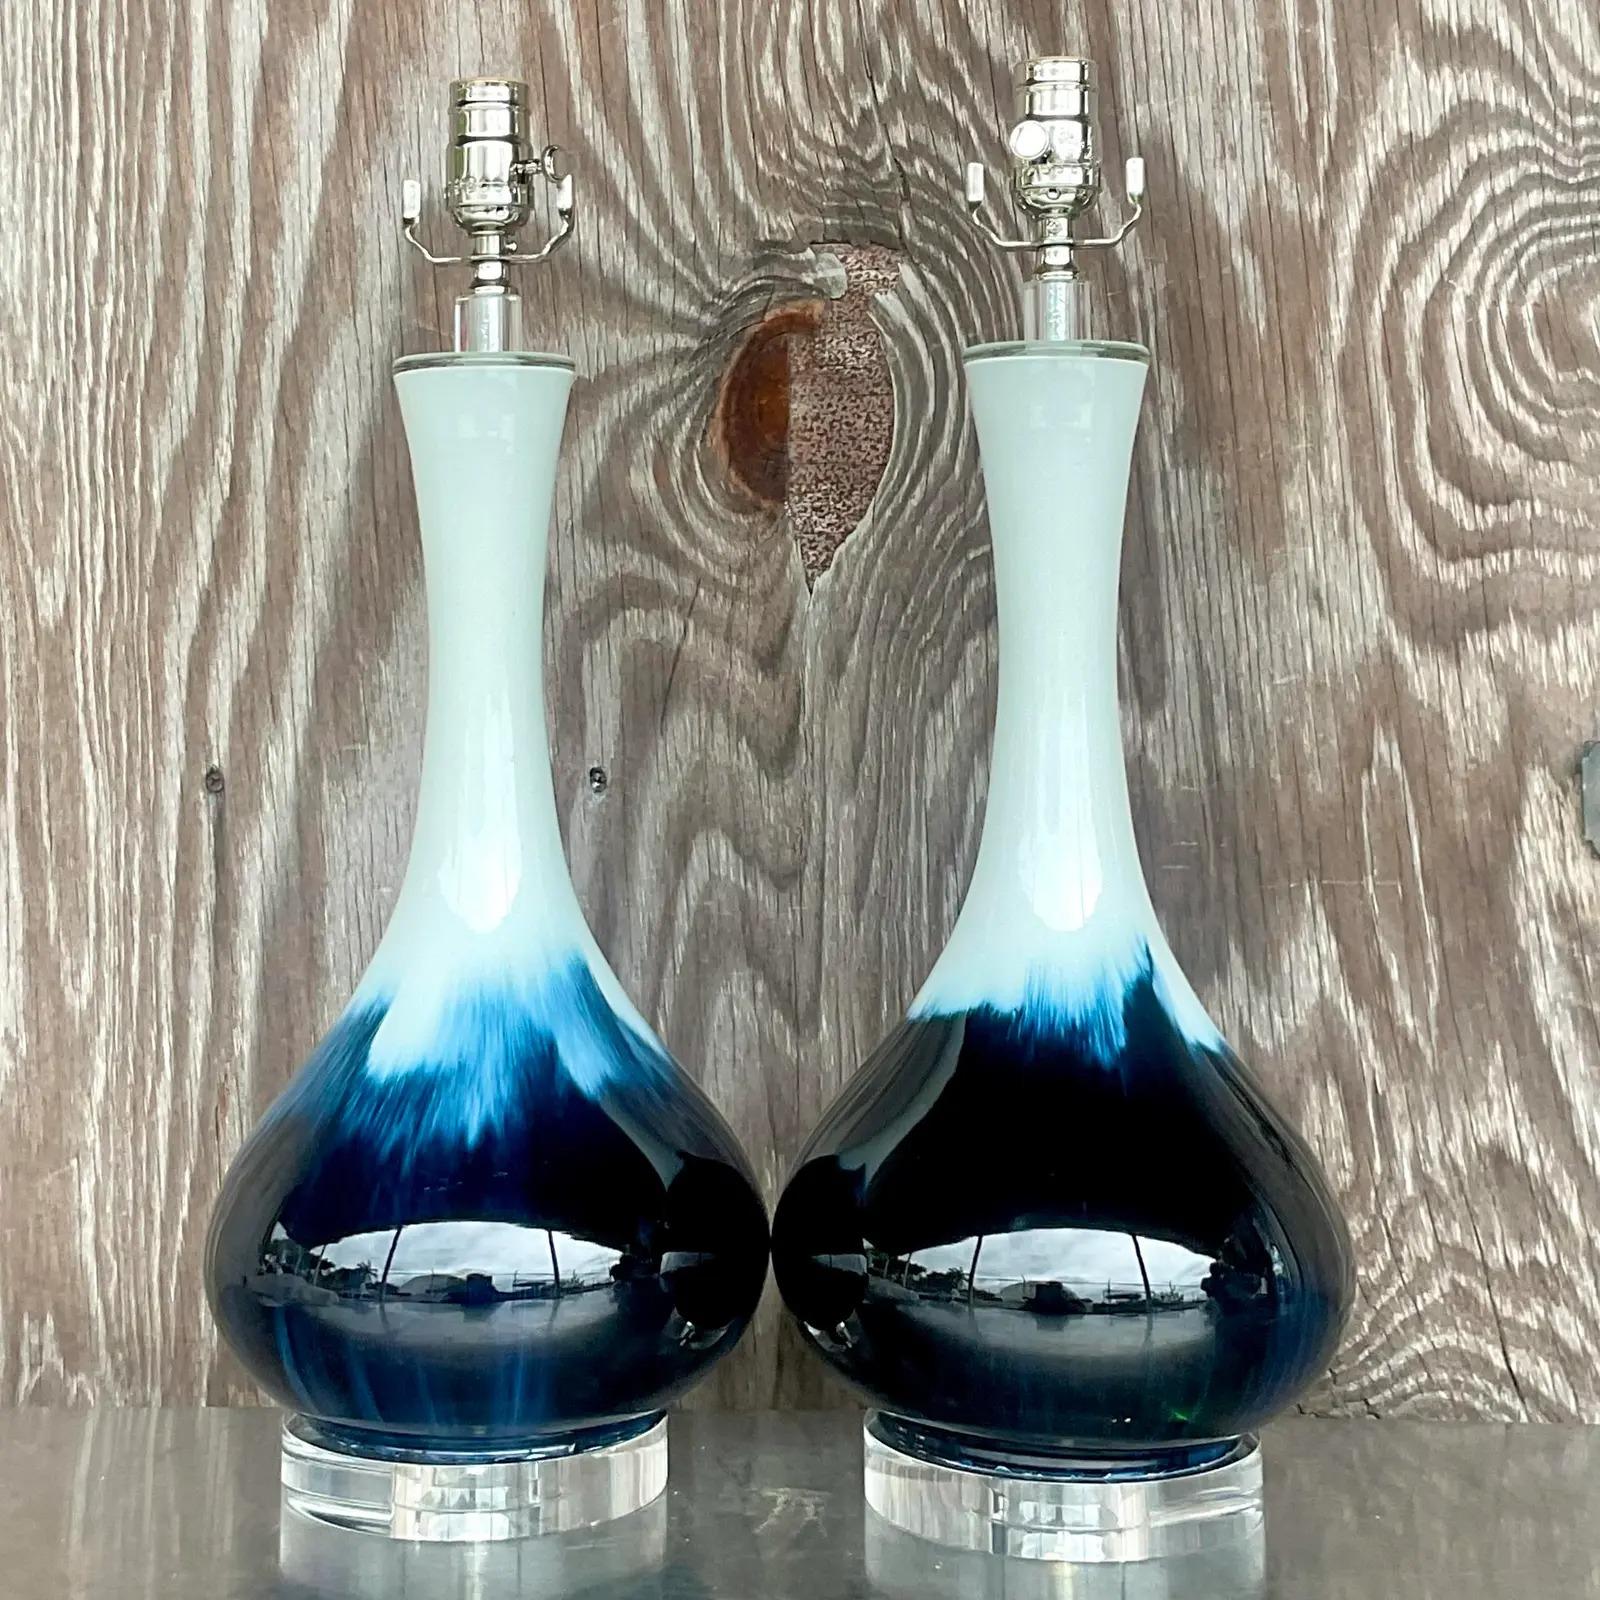 North American Vintage Regency Glazed Ceramic Bulb Lamps - a Pair For Sale